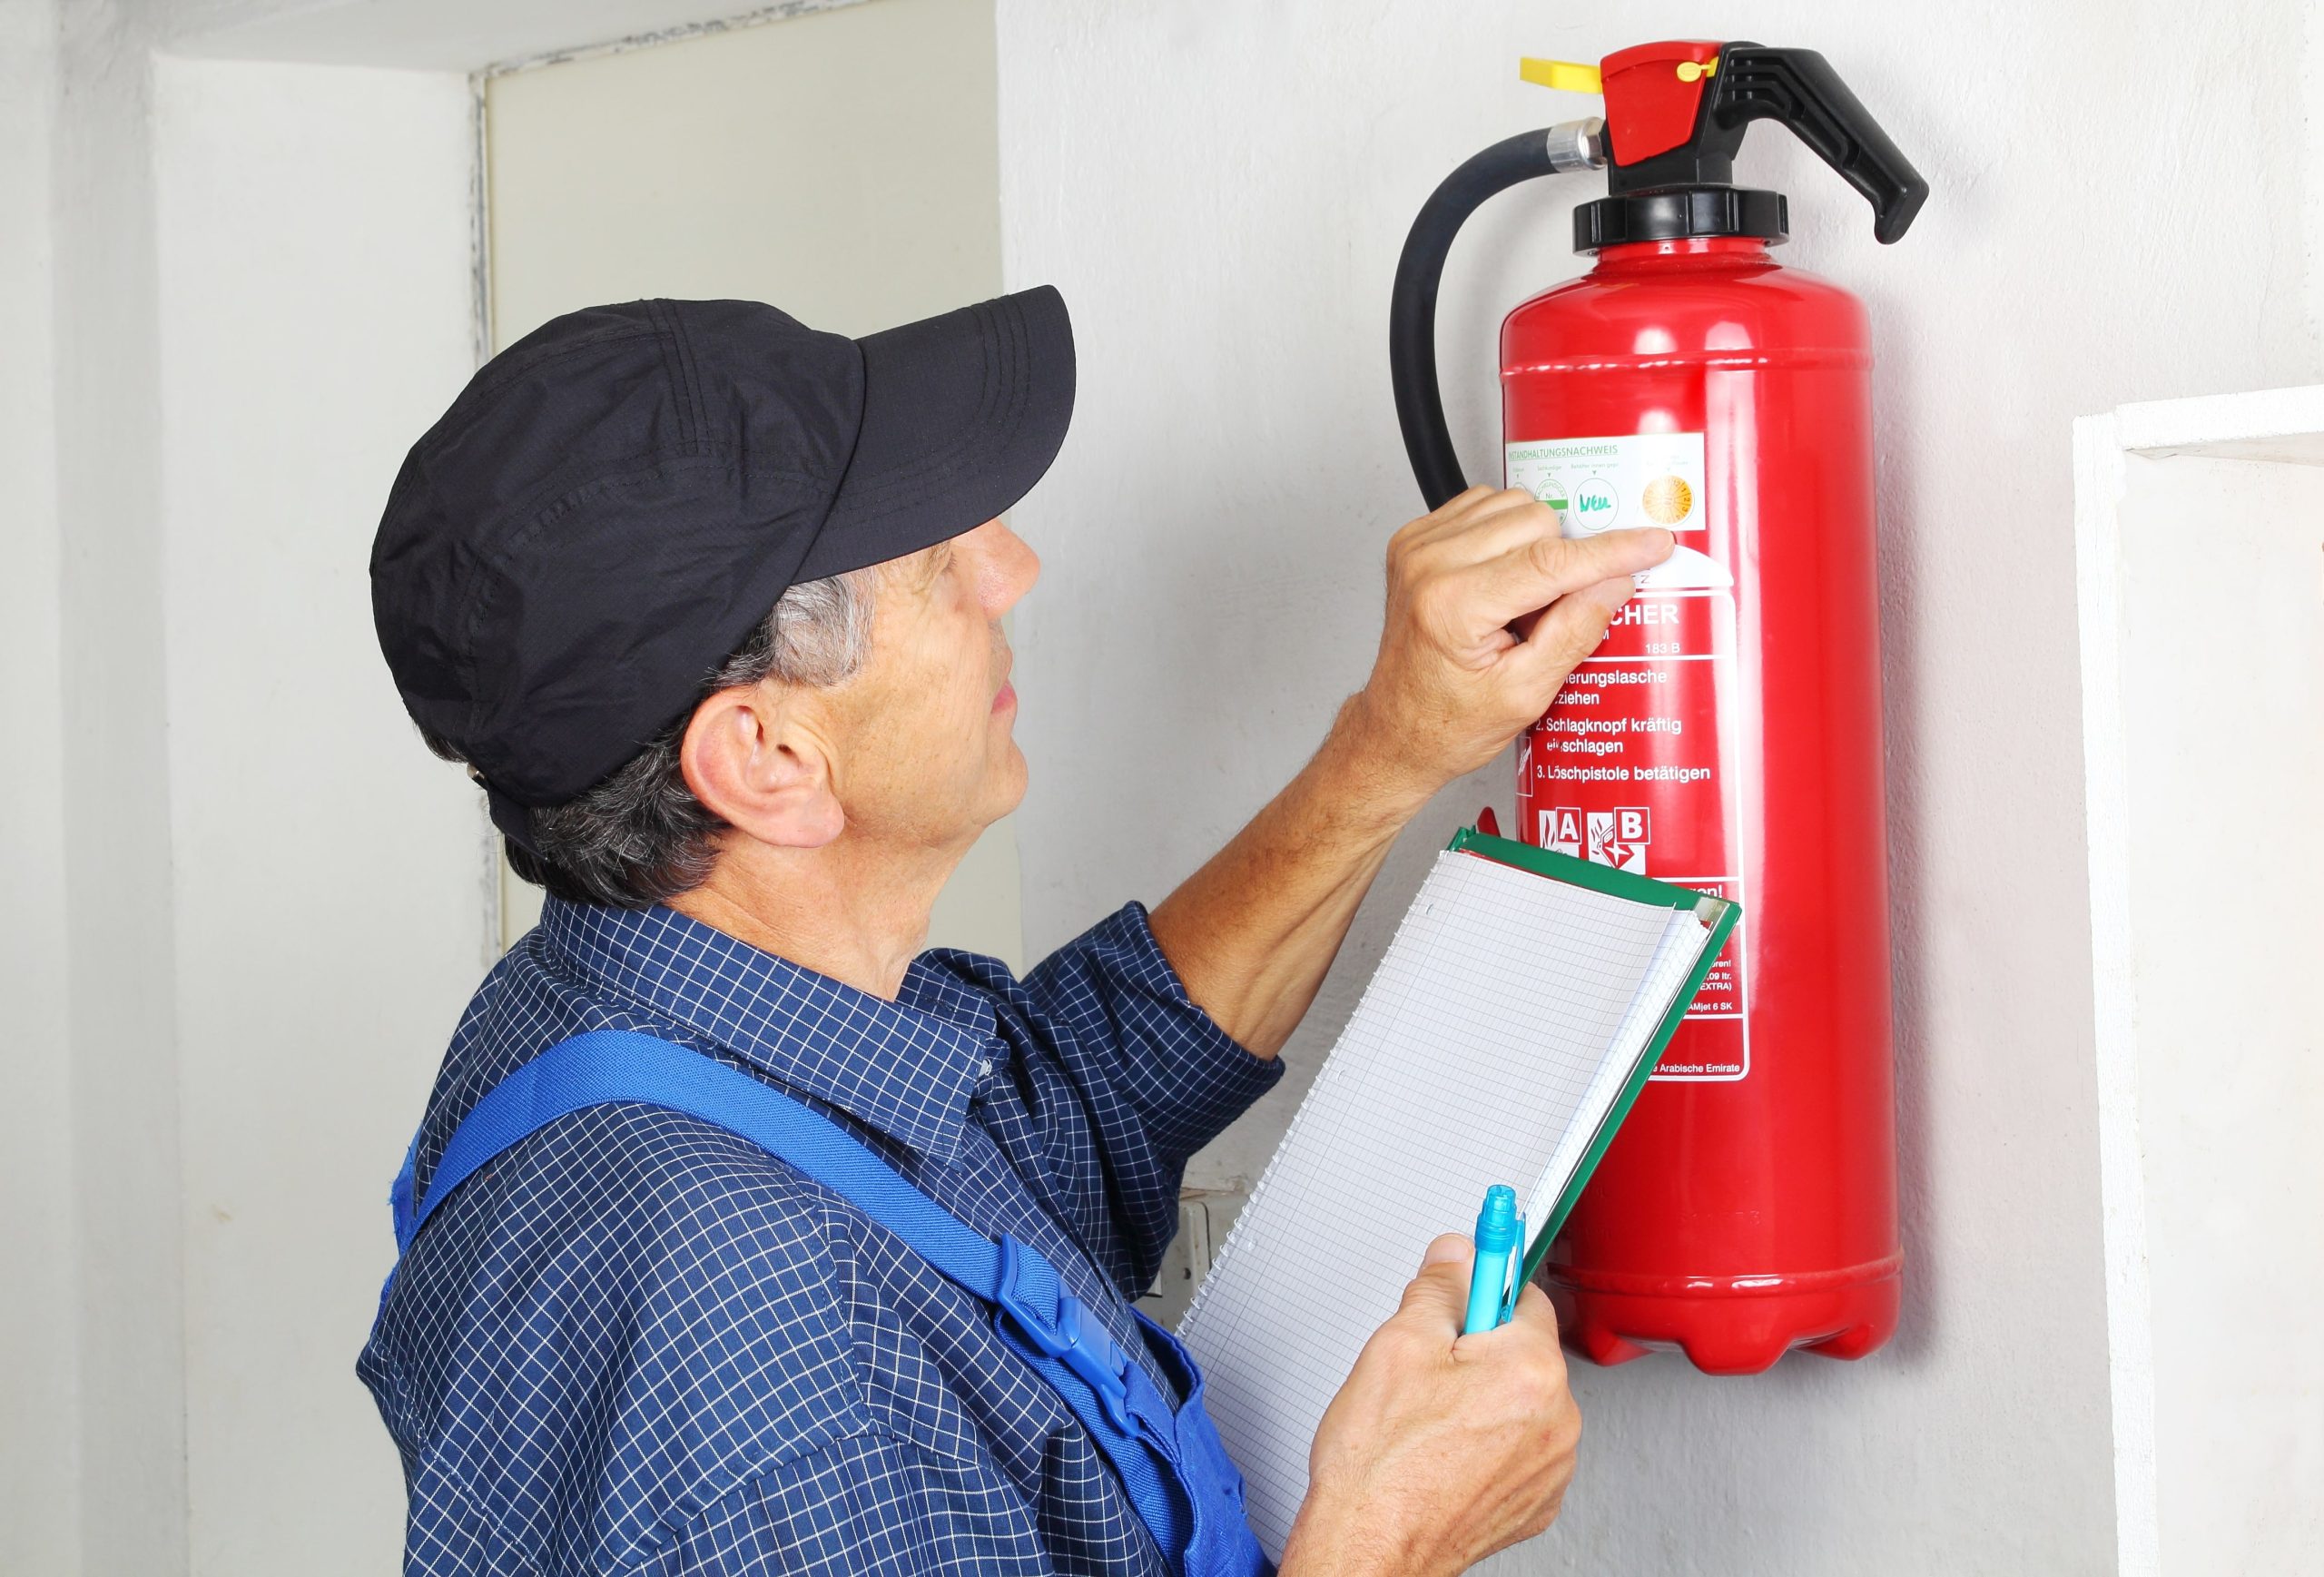 Servicing Fire Extinguishers in St. Petersburg Florida